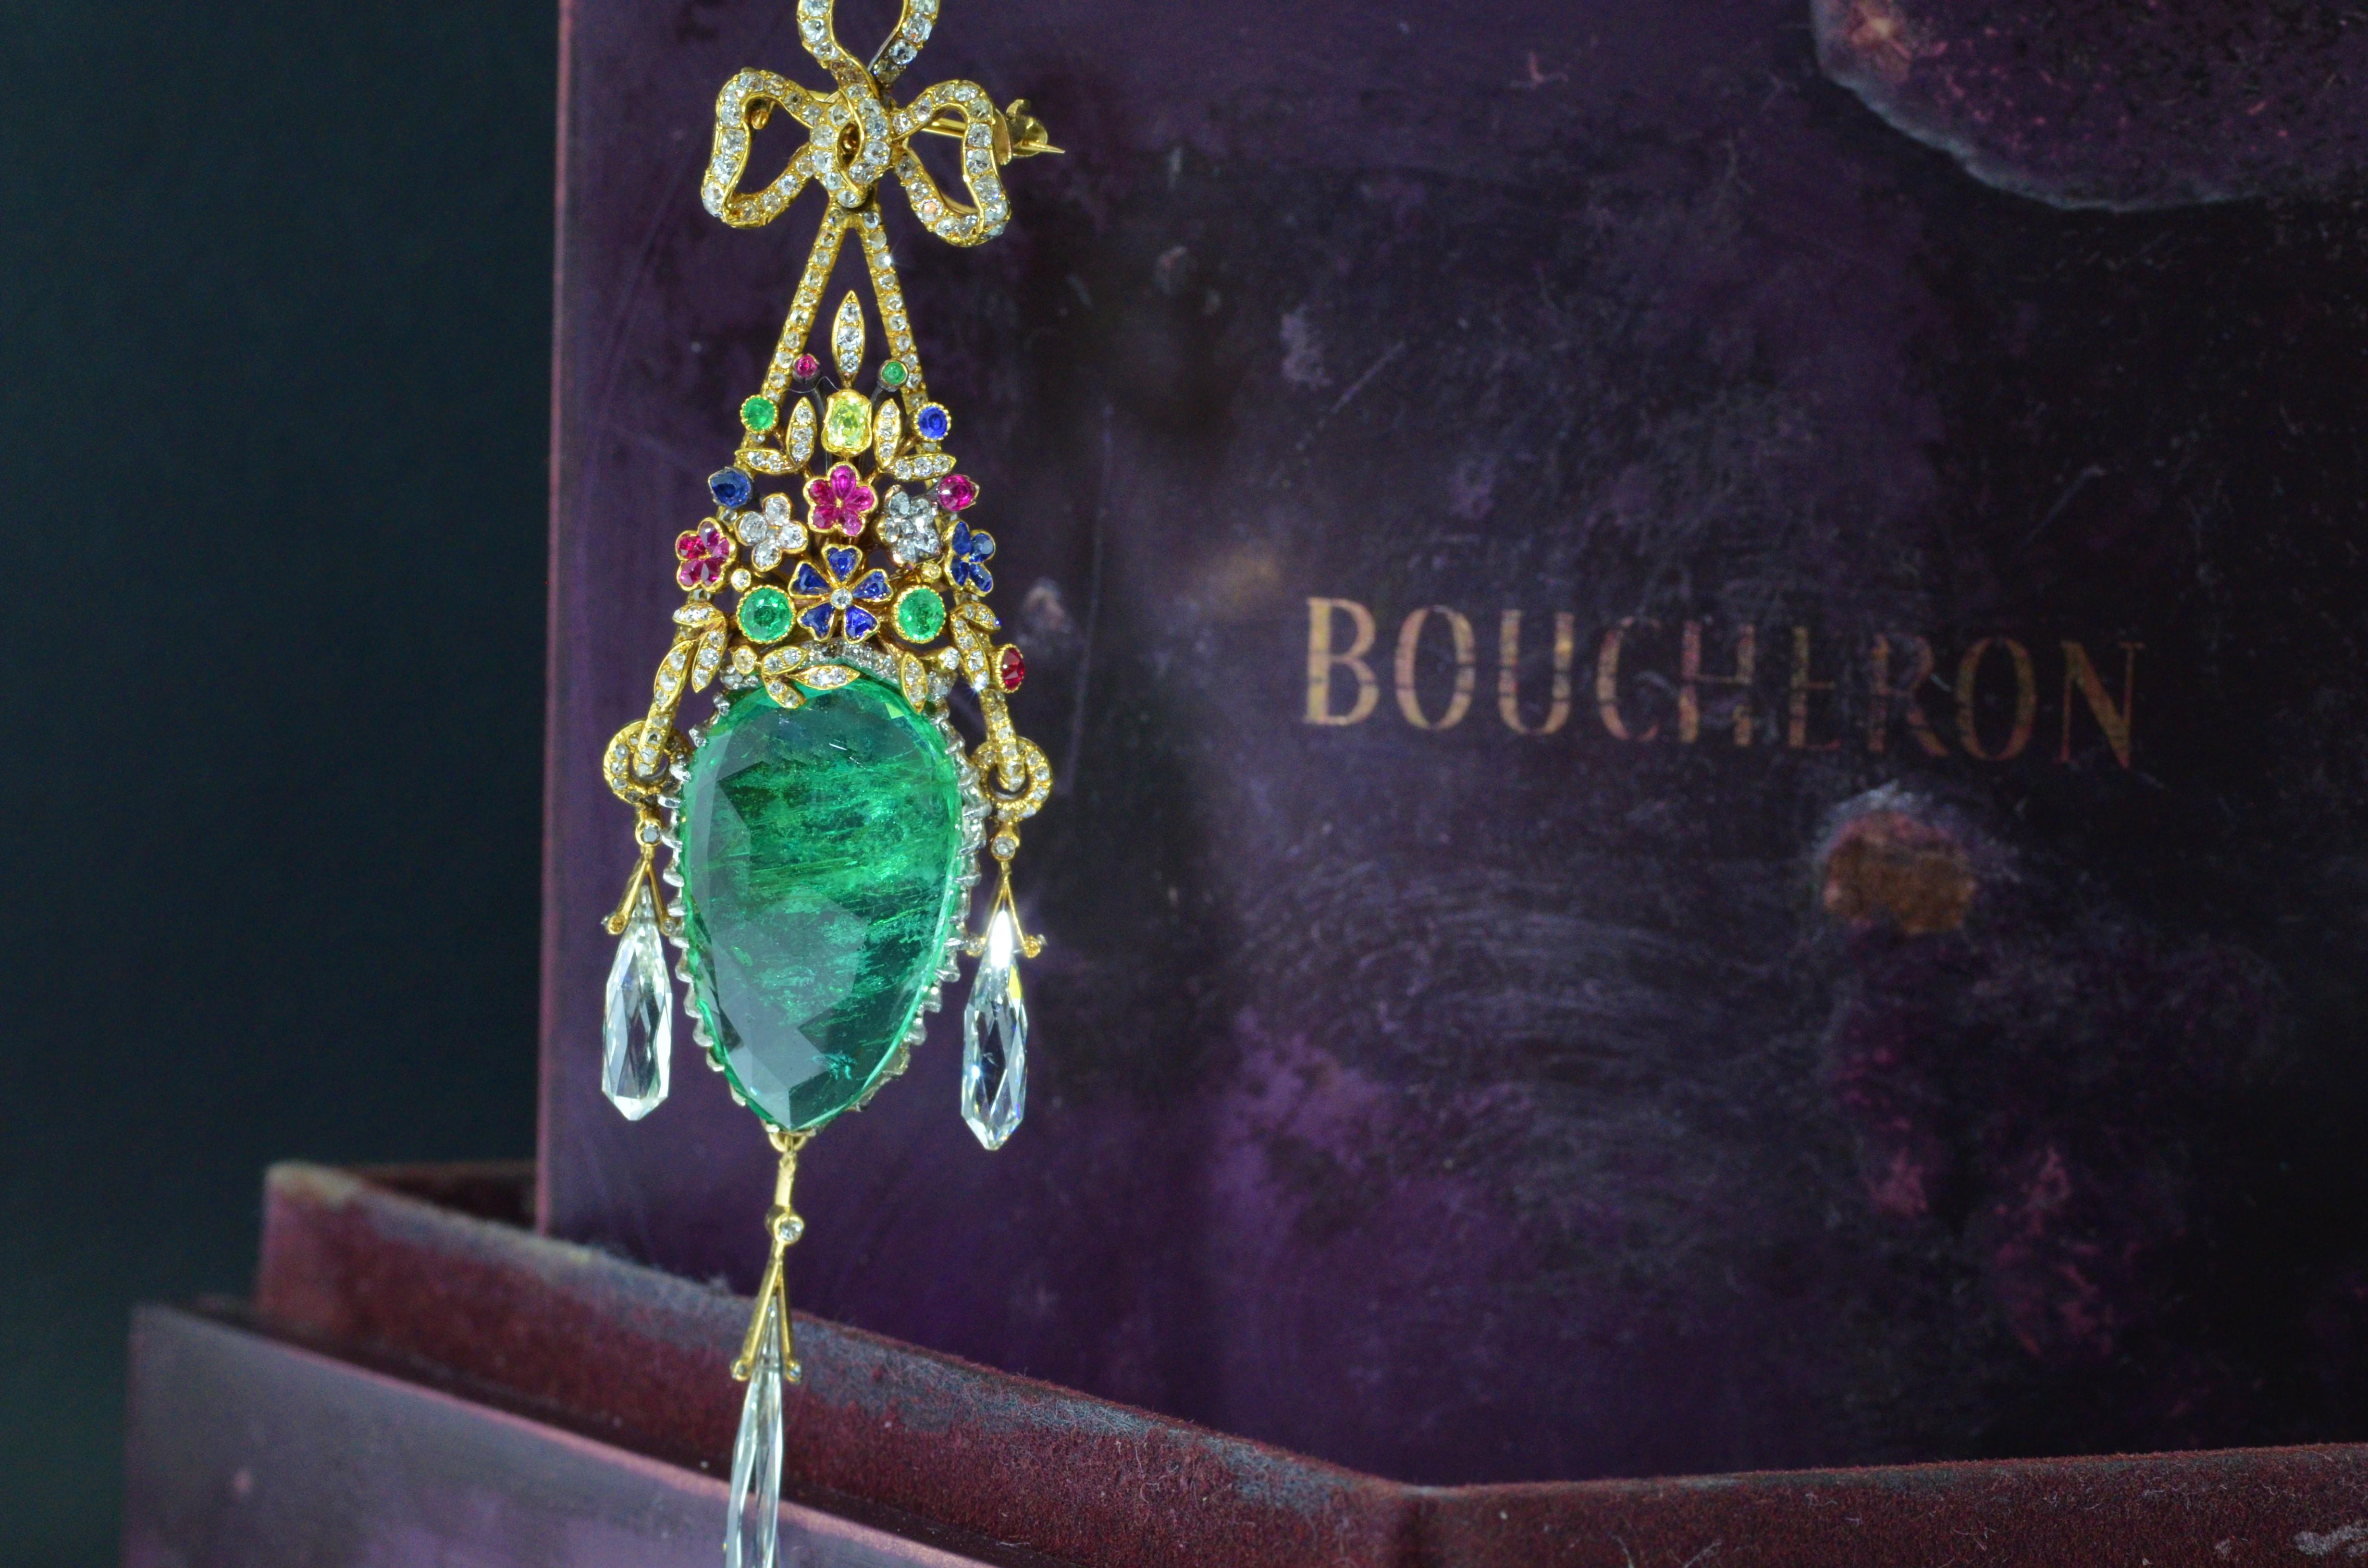 Outstanding Multi-Gem Pendant Brooch by Frederic Boucheron, circa 1890 In Excellent Condition For Sale In Warrington, PA